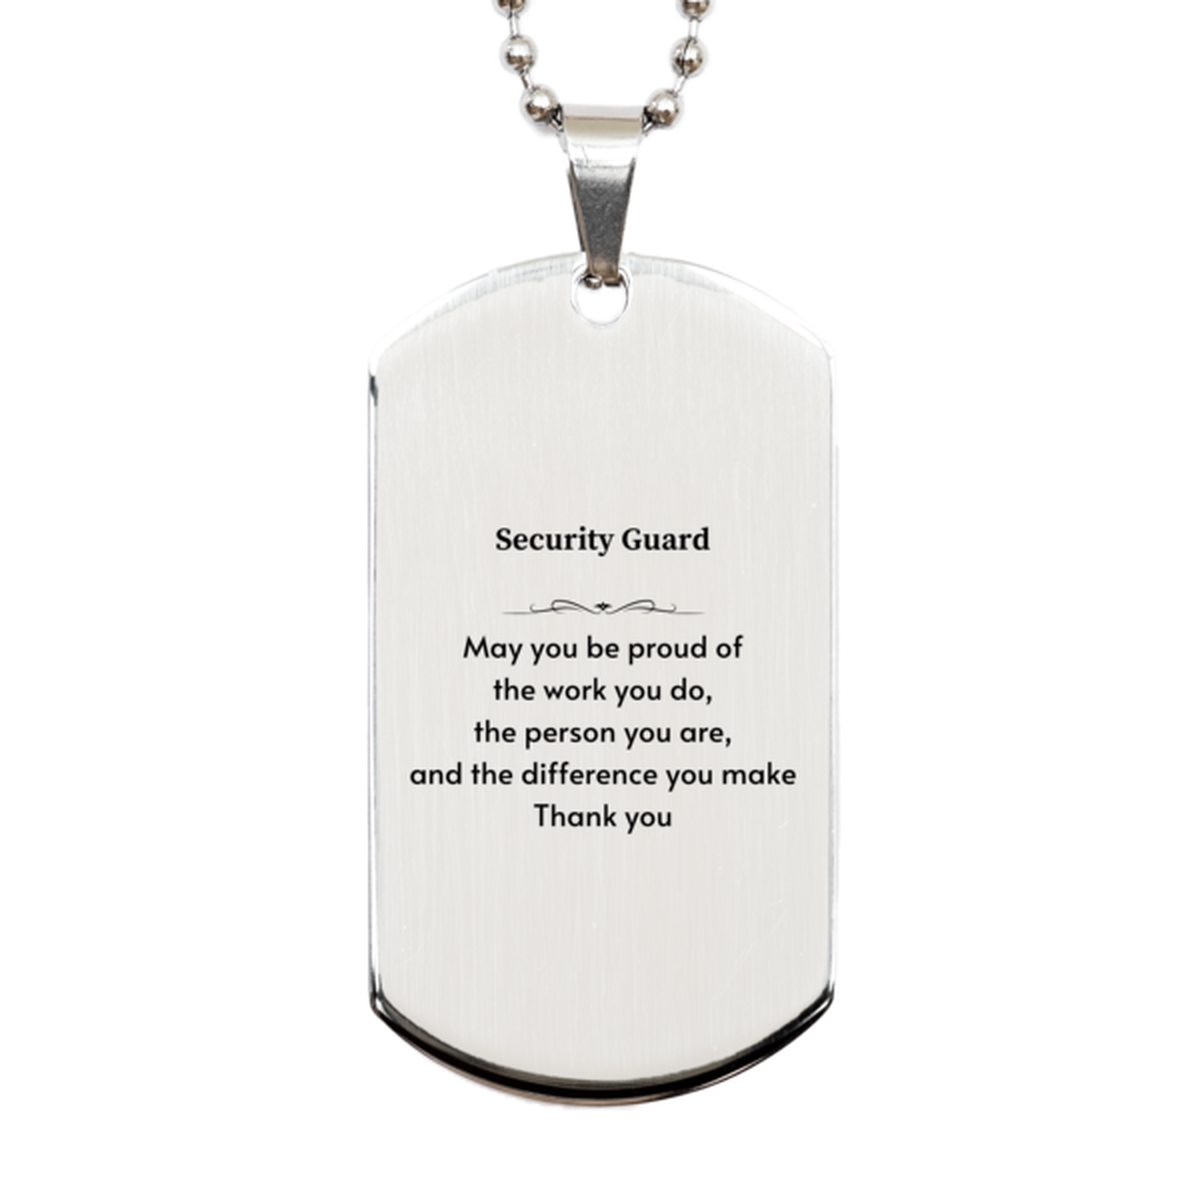 Heartwarming Silver Dog Tag Retirement Coworkers Gifts for Security Guard, Security Guard May You be proud of the work you do, the person you are Gifts for Boss Men Women Friends